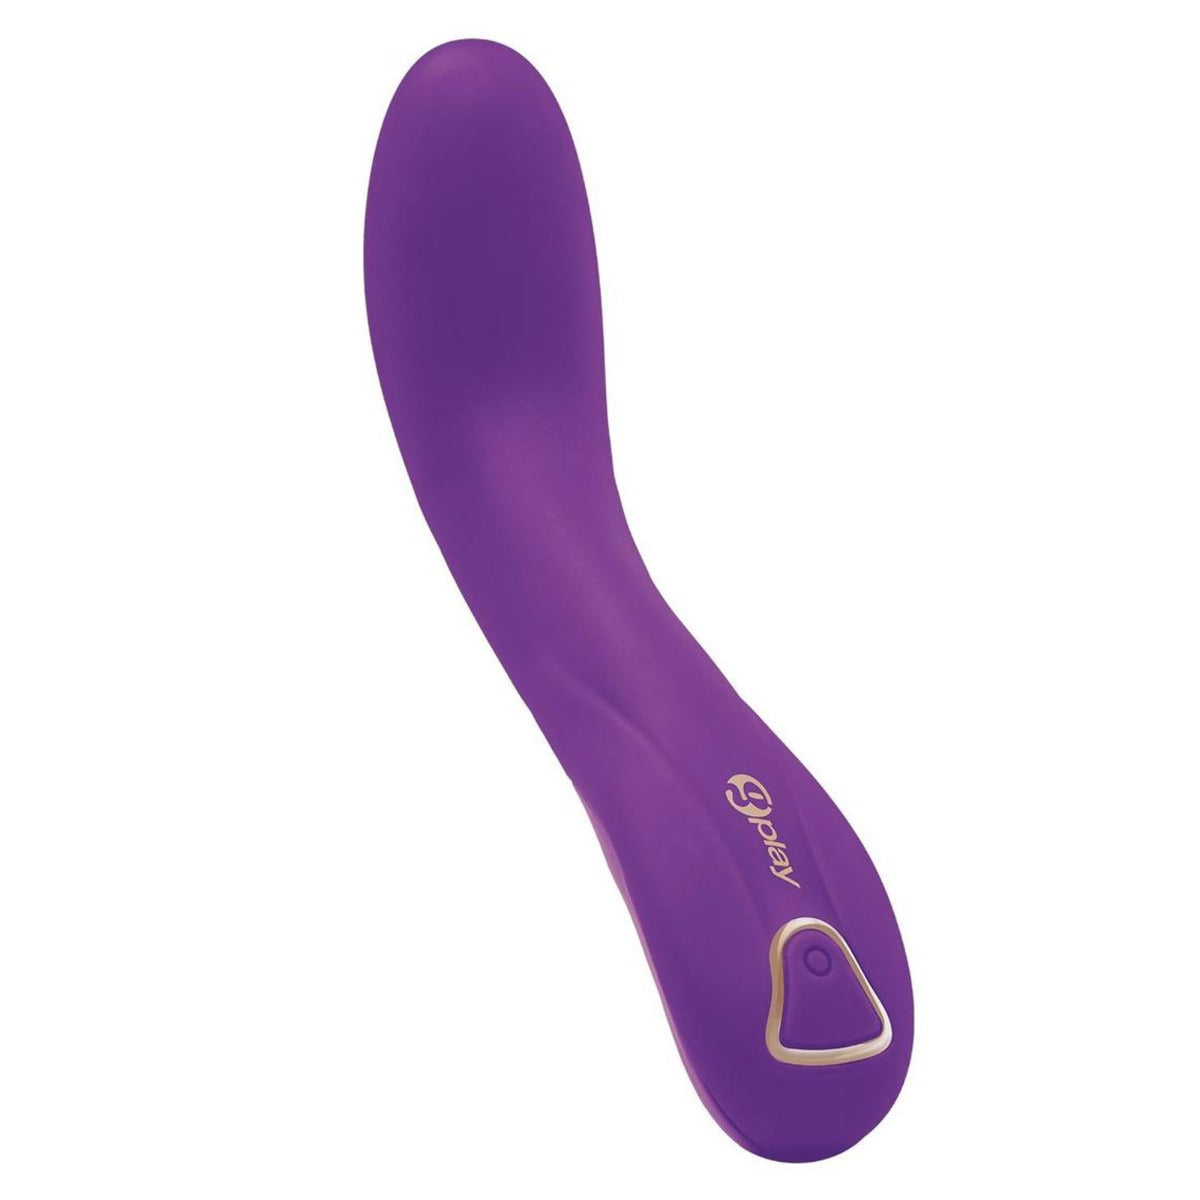 Bodywand | G Play Ergonomic Squirt Trainer G Spot And Clitoral Vibrator - Purple